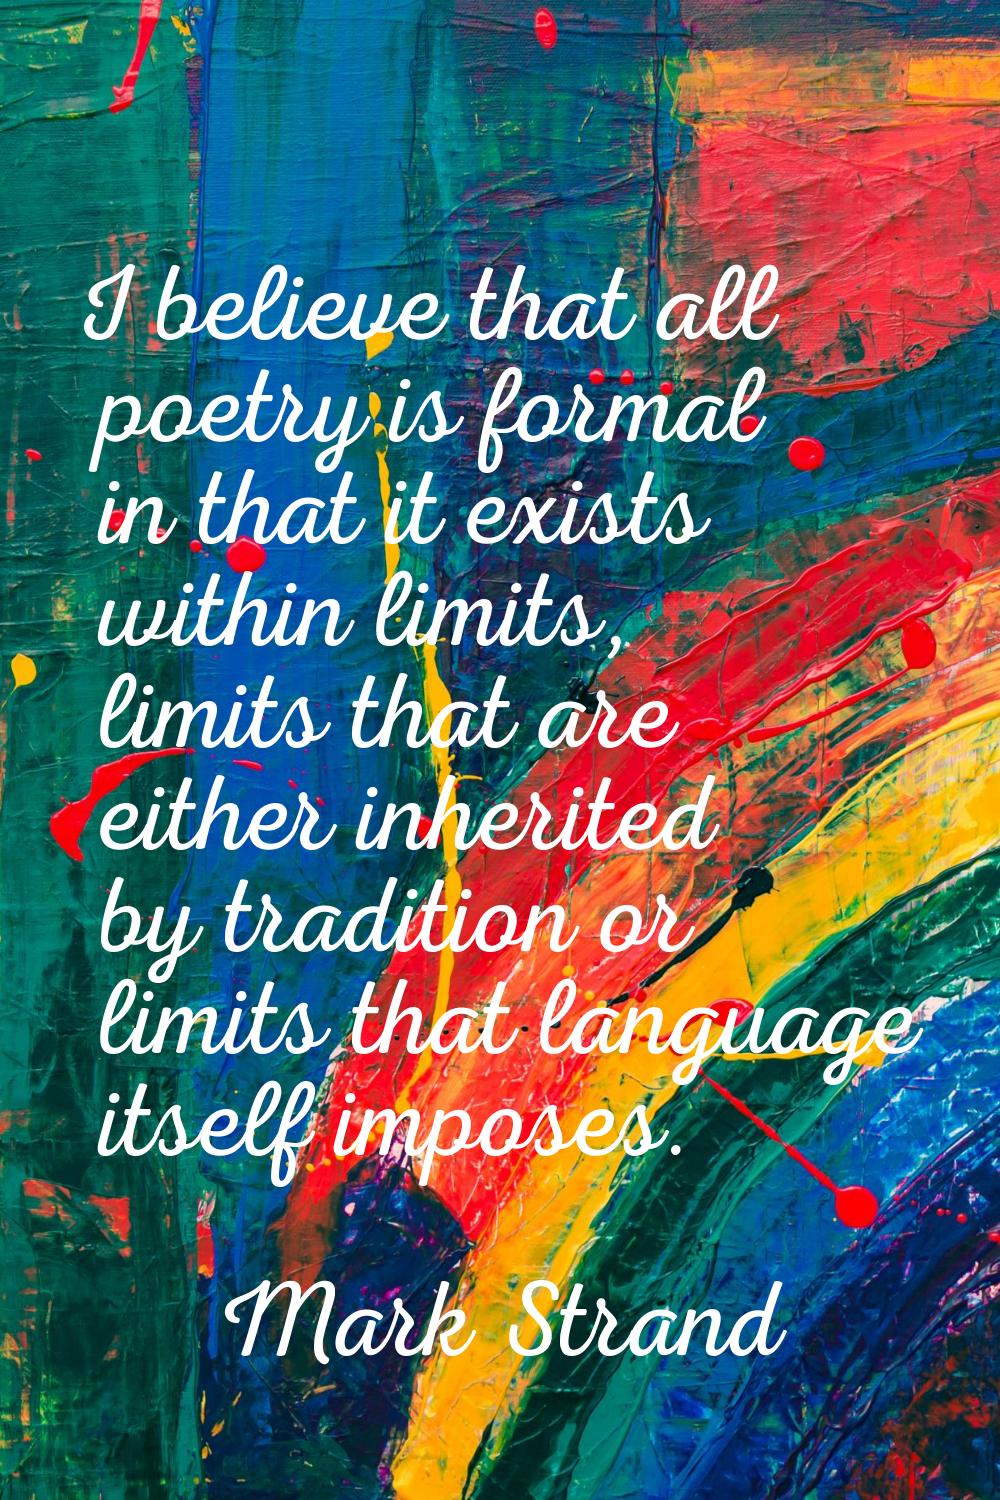 I believe that all poetry is formal in that it exists within limits, limits that are either inherit